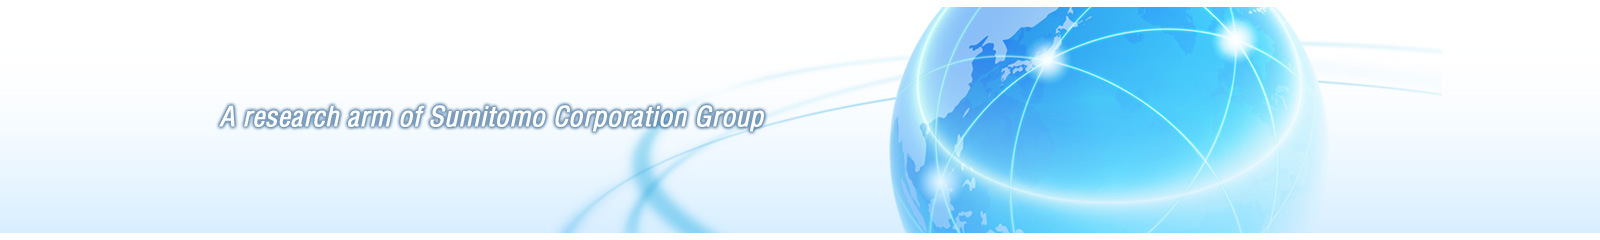 A research arm of Sumitomo Corporation Group